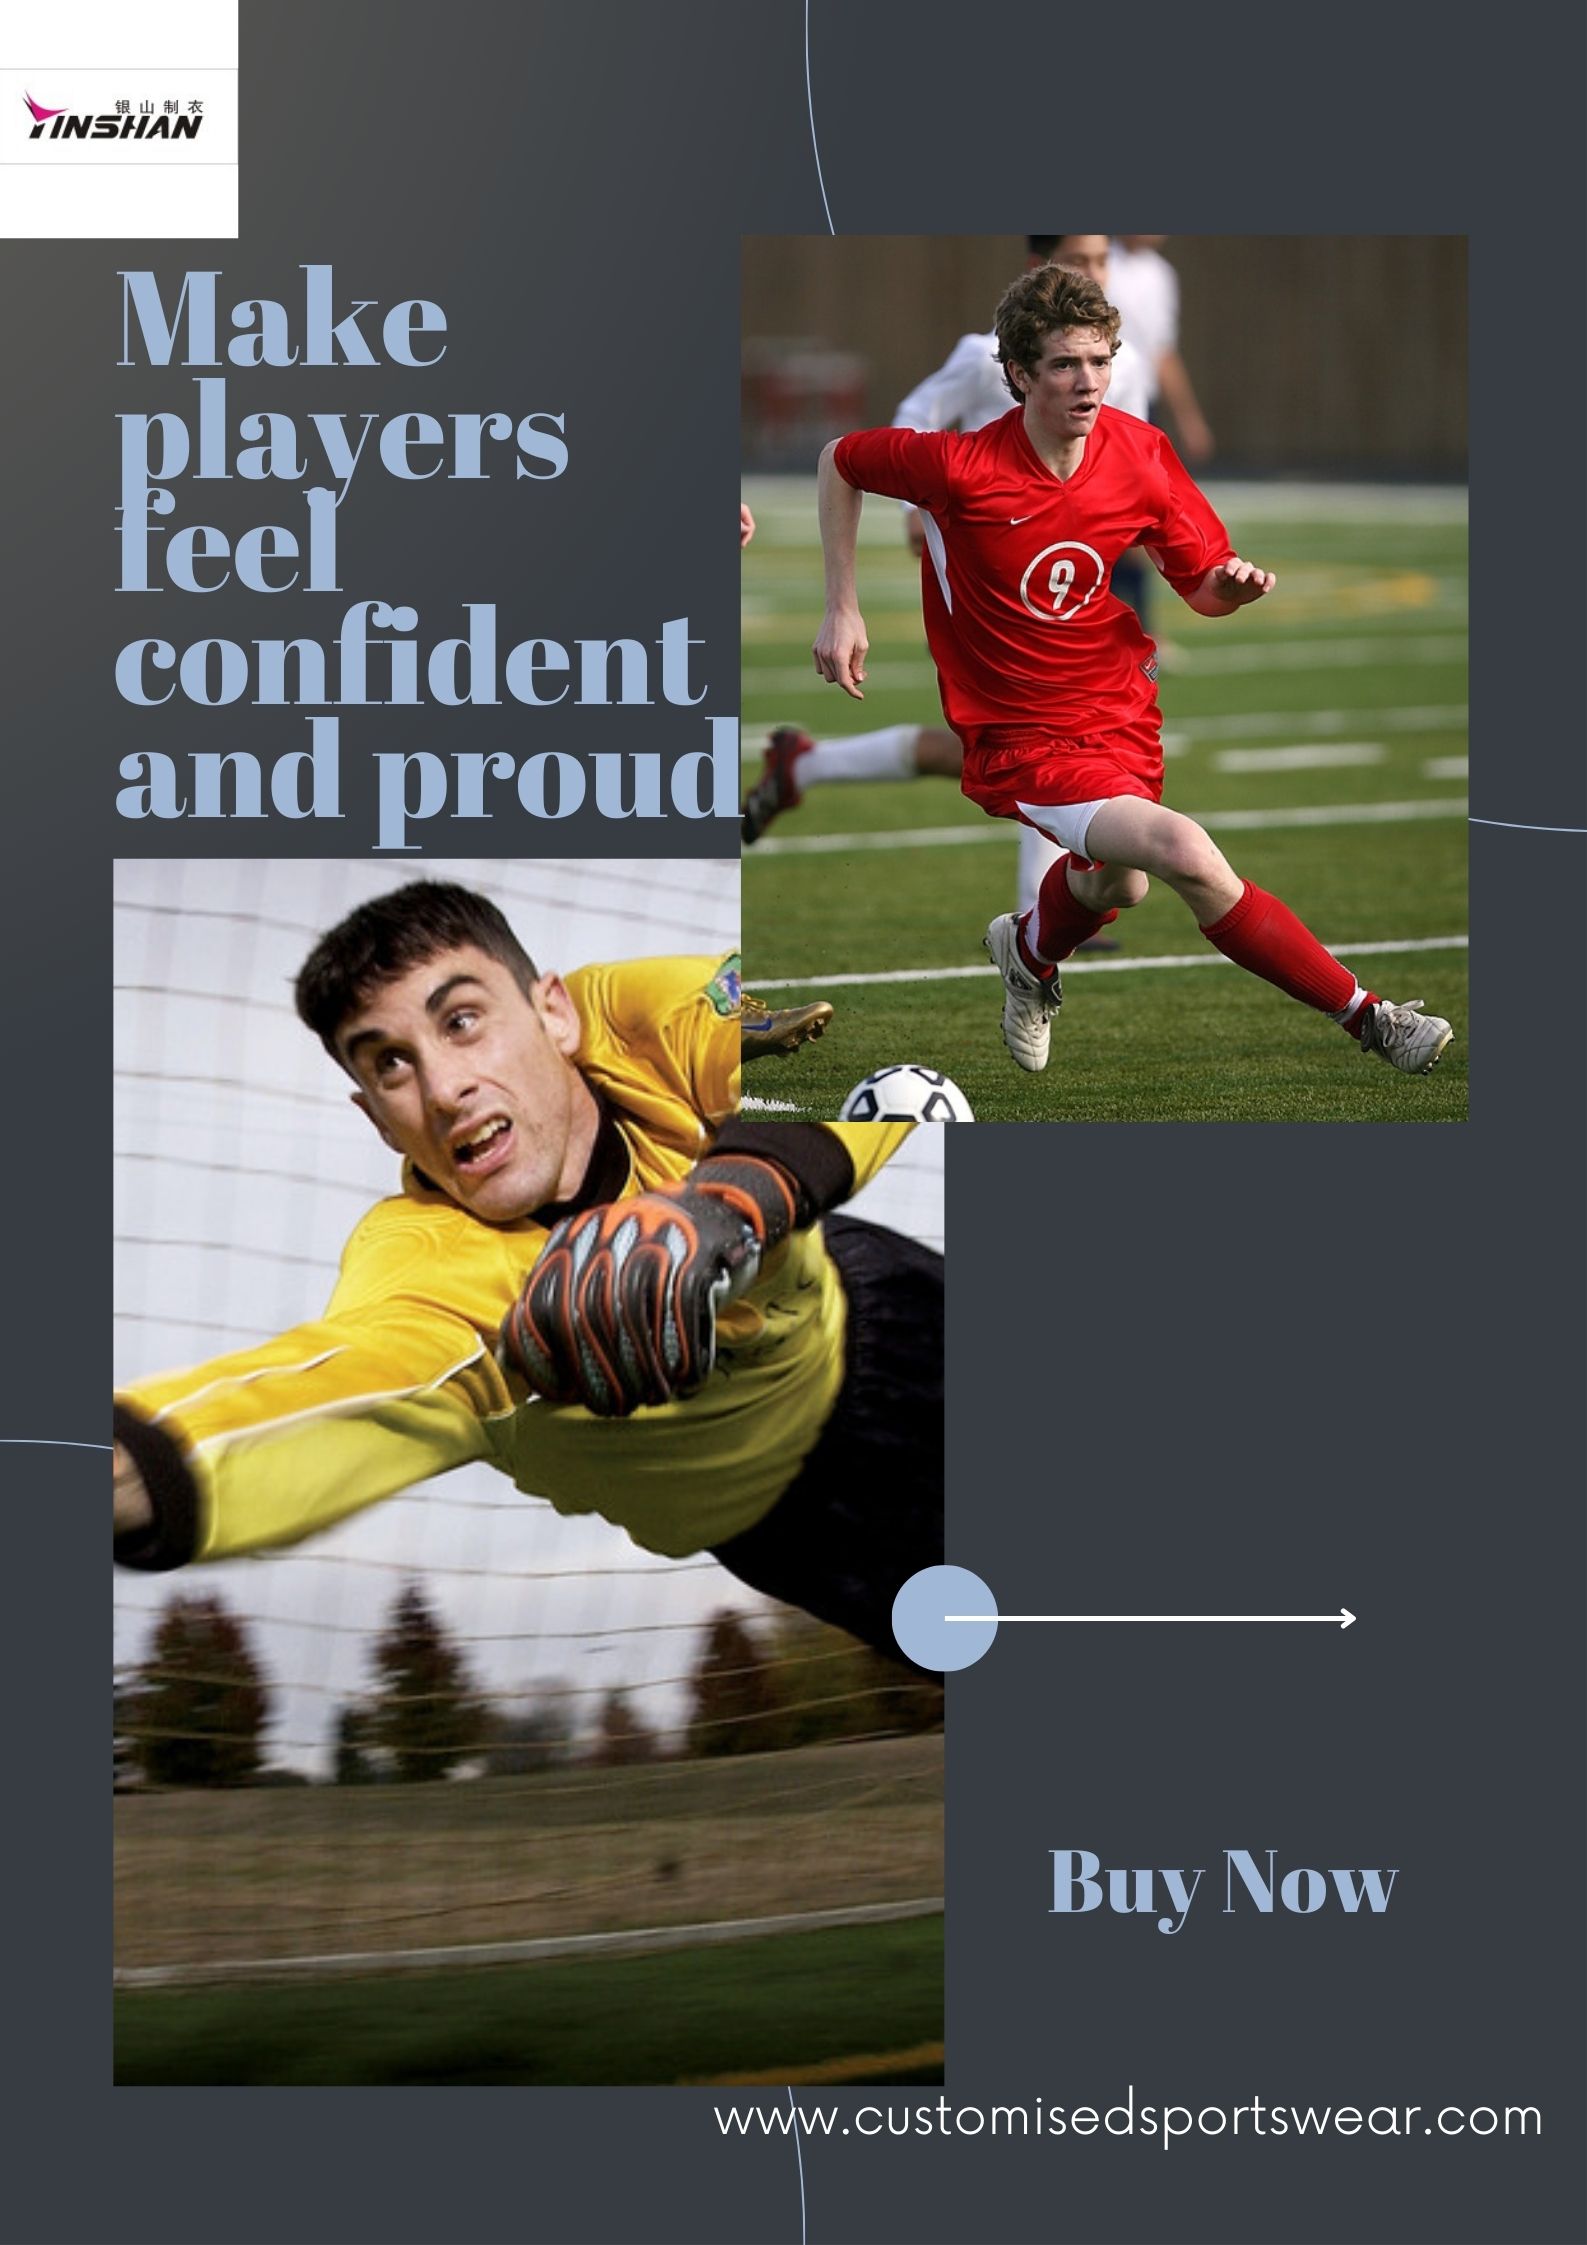 Make players feel confident and proud